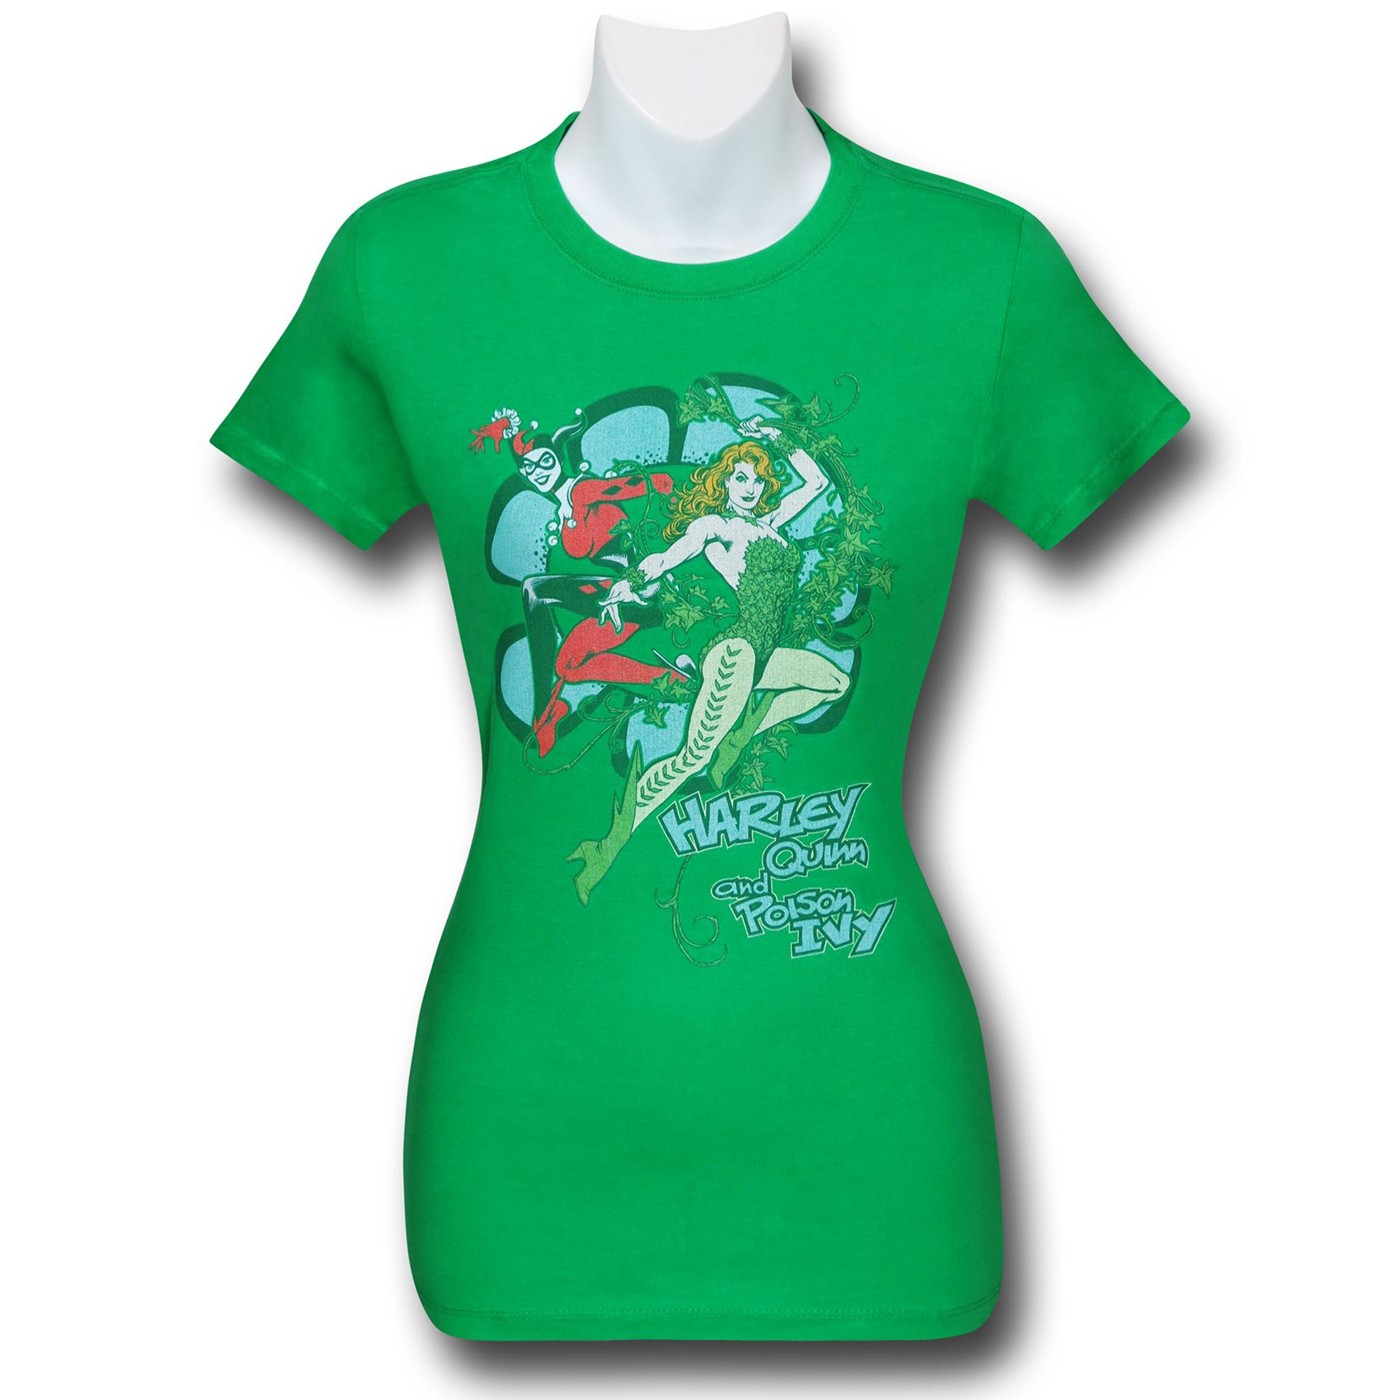 Harley and Ivy Womens Green T-Shirt